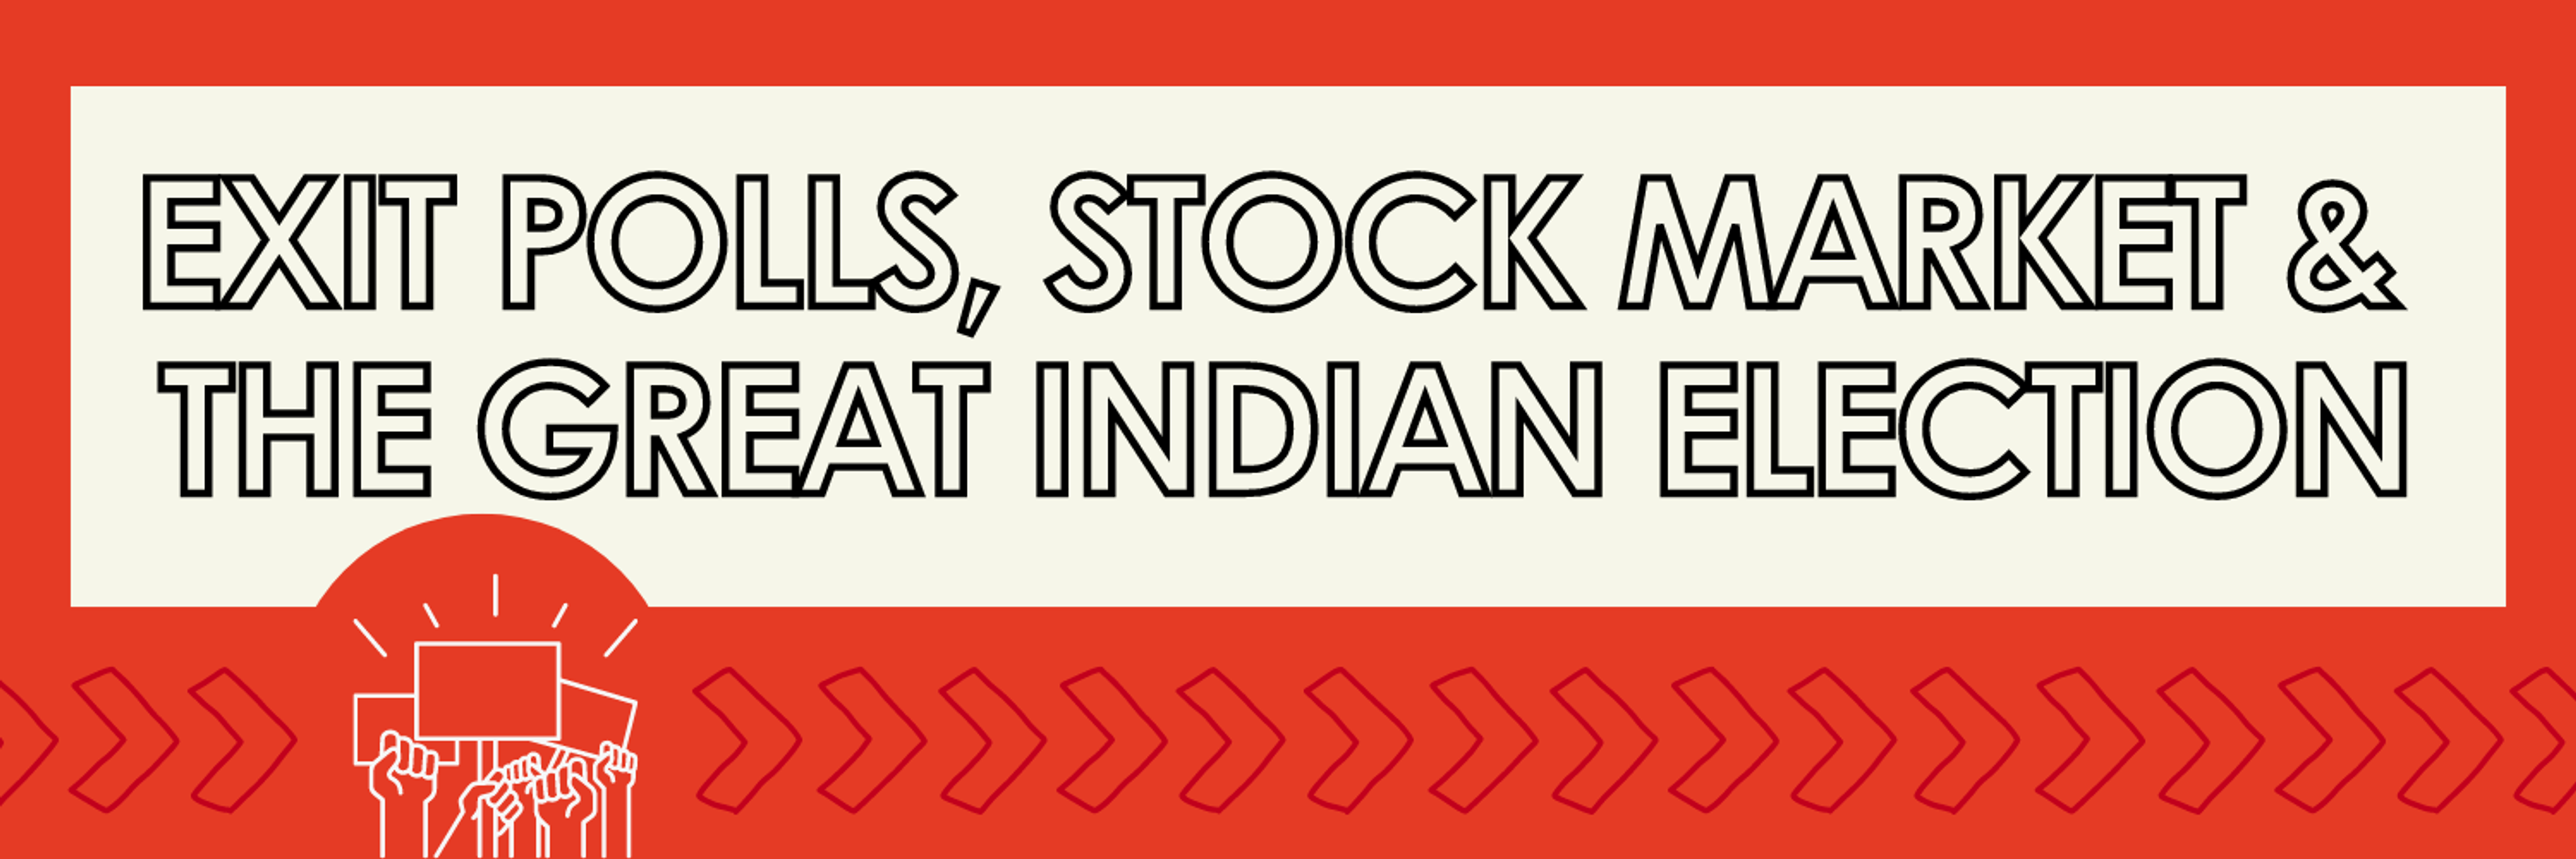  The image is a wide banner with a bright red background and white text. It reads "EXIT POLLS, STOCK MARKET & THE GREAT INDIAN ELECTION" in bold, capitalized letters. The layout is straightforward, with a central light bulb icon symbolizing ideas or insights, and red arrow motifs pointing right, enhancing the dynamic and forward-moving theme of the content.